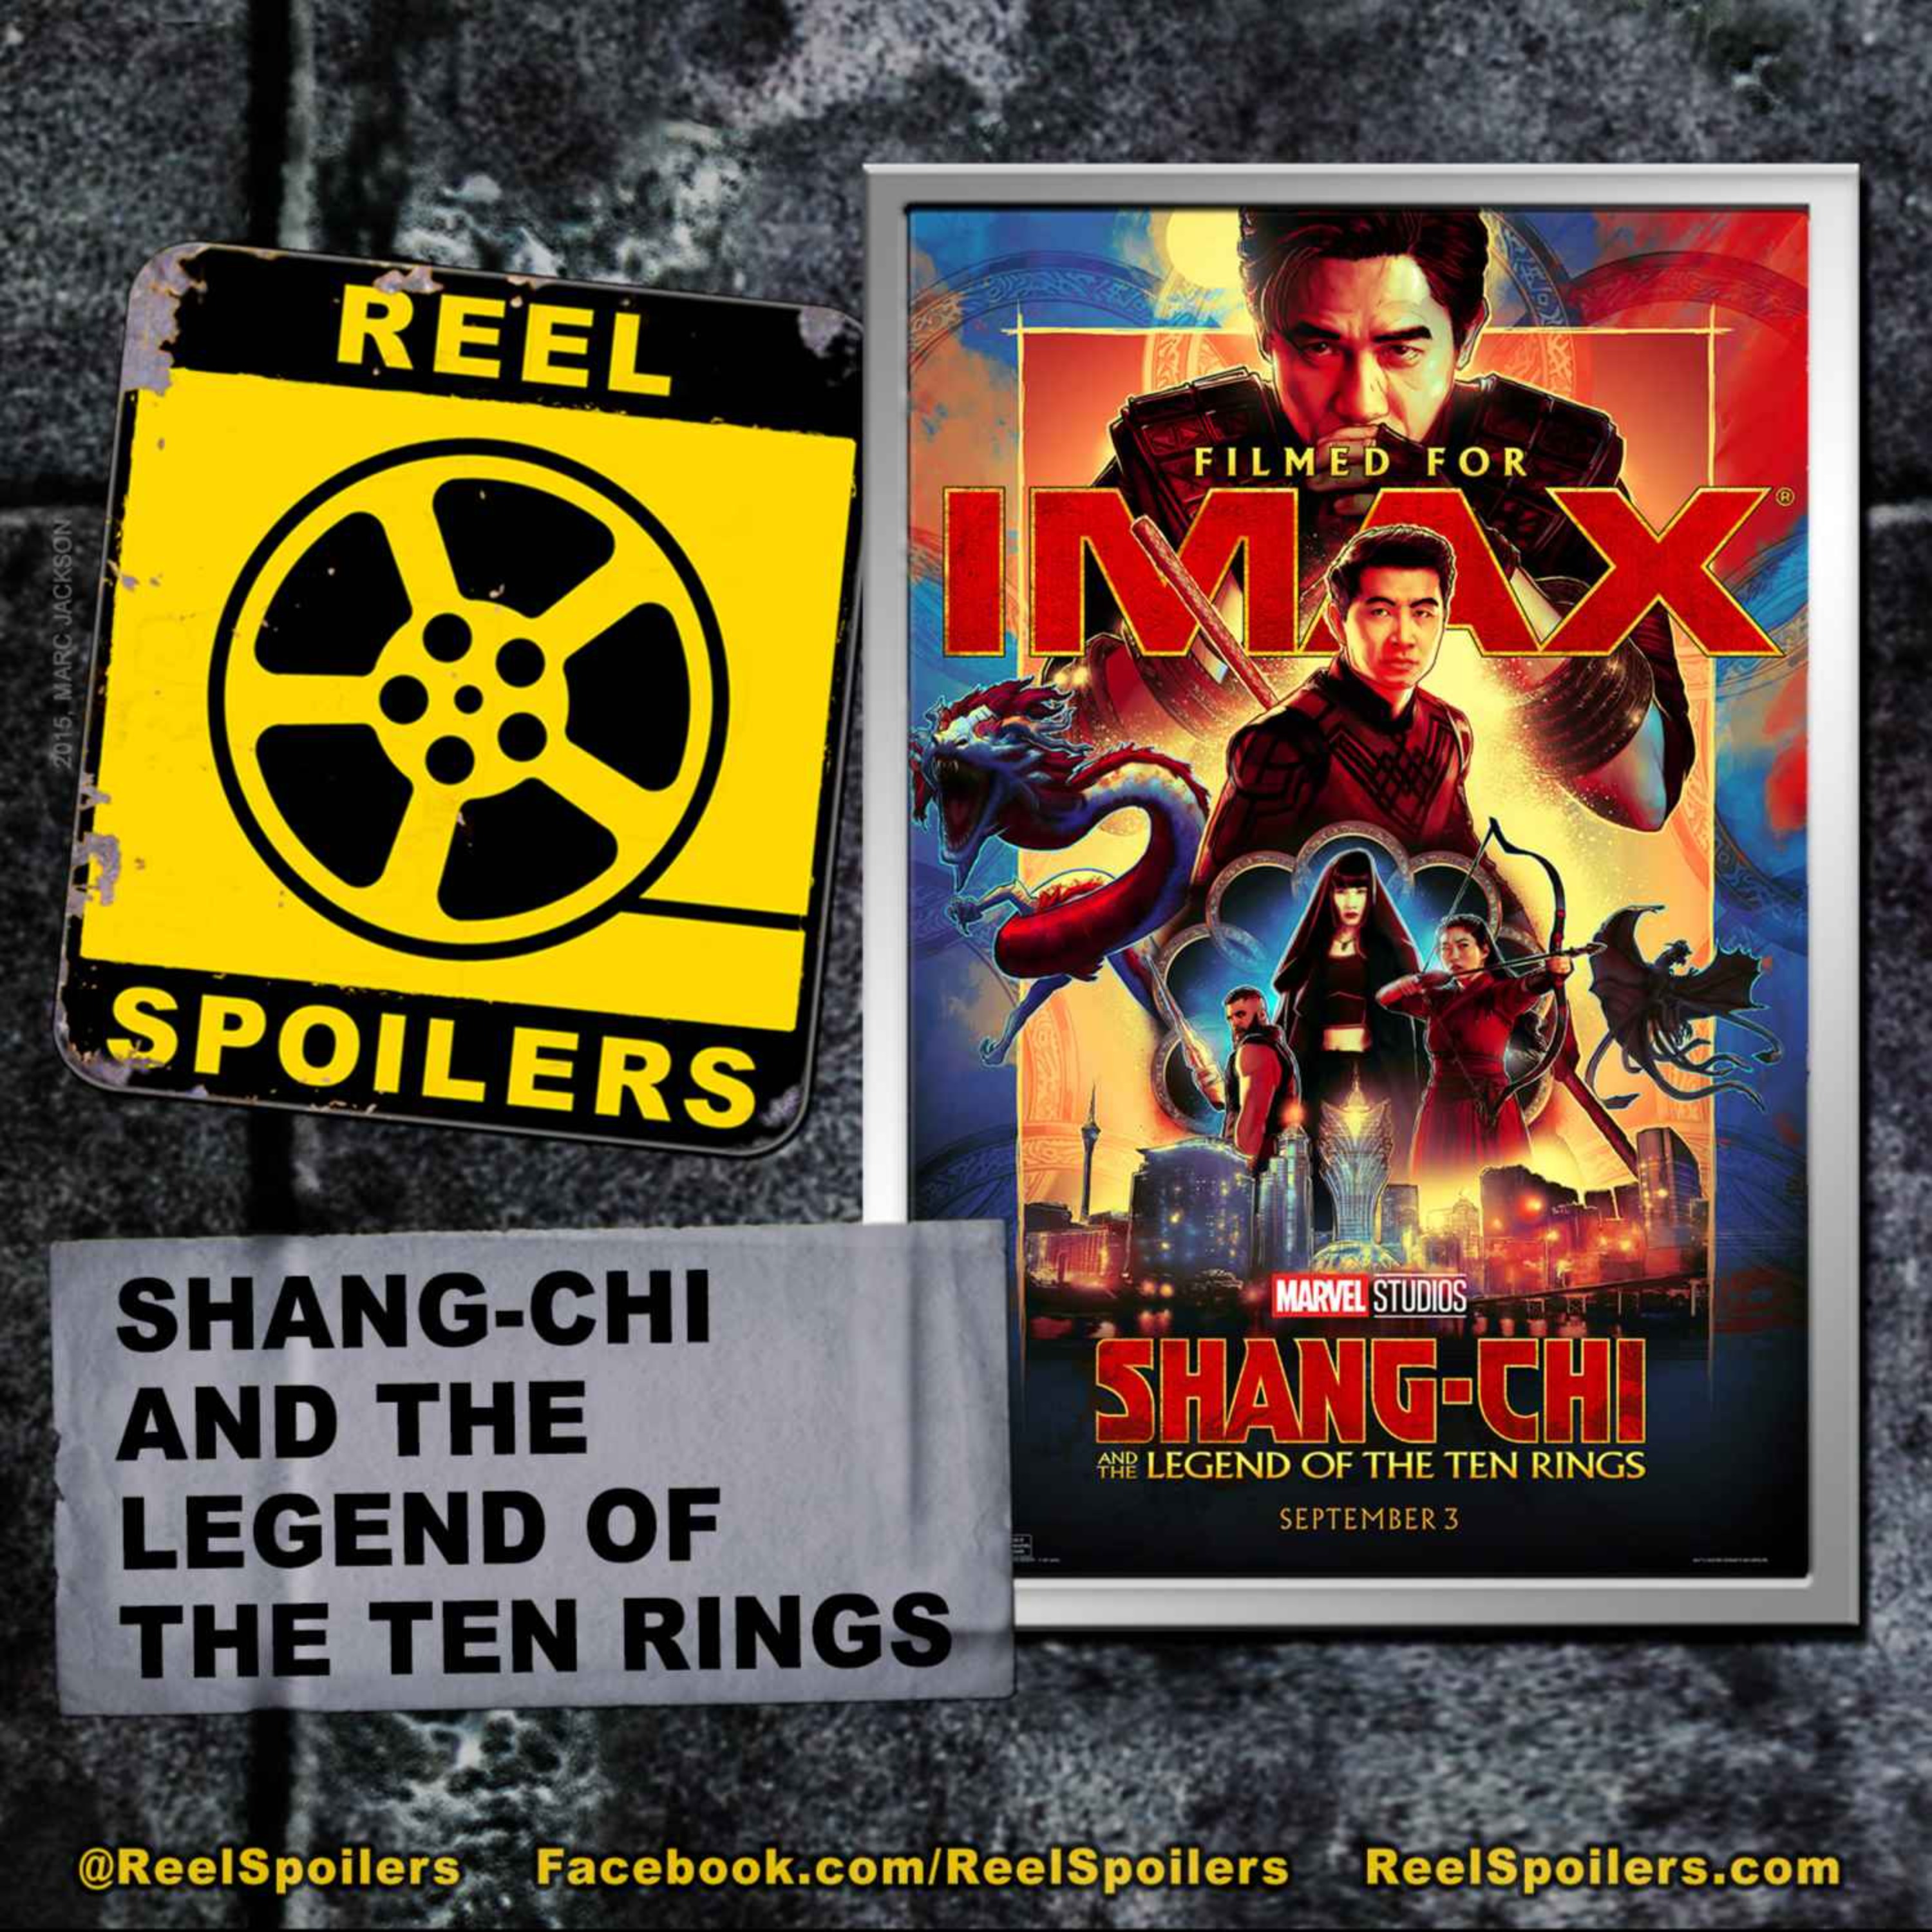 Marvel's SHANG-CHI AND THE LEGEND OF THE TEN RINGS Image